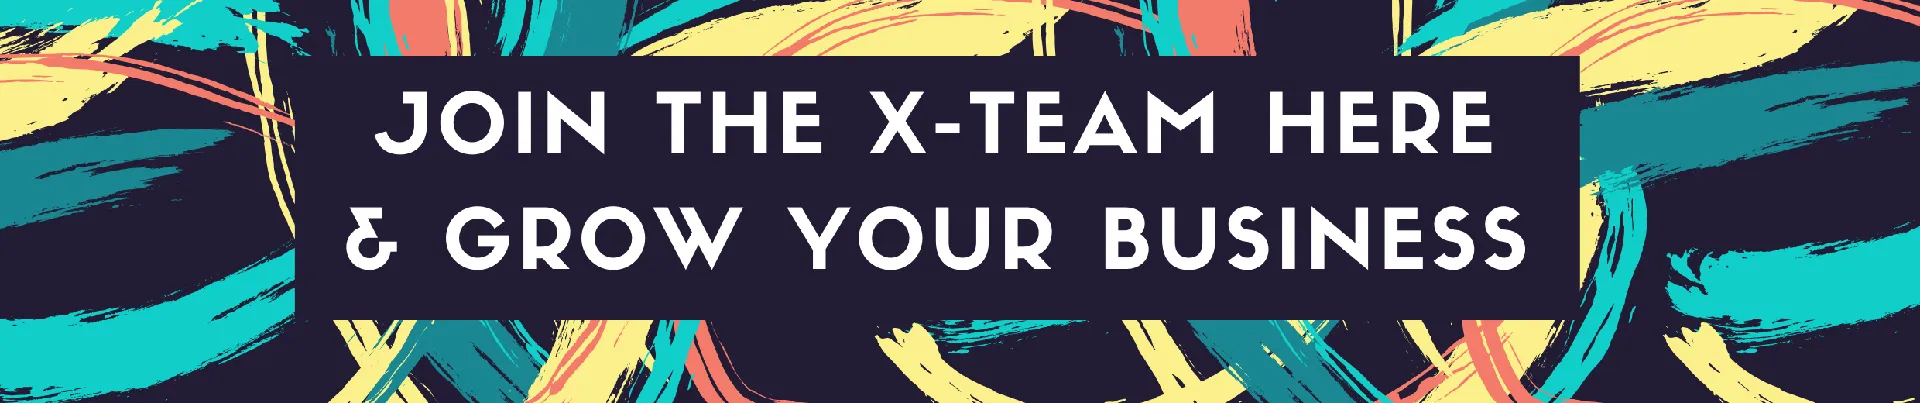 Join the X-Team Today